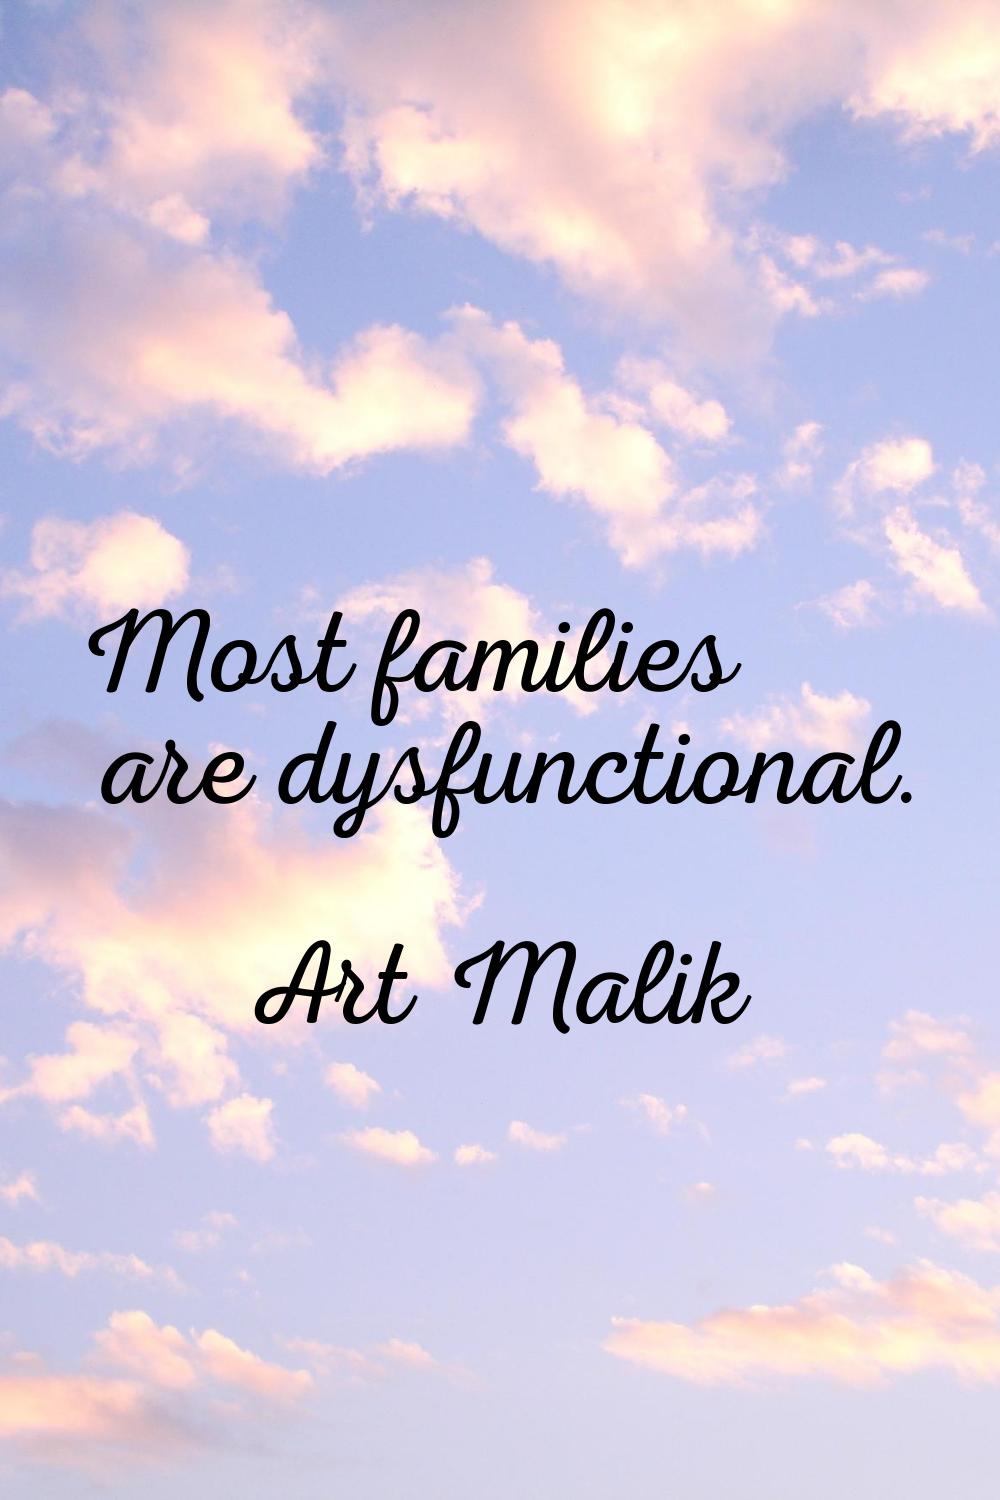 Most families are dysfunctional.